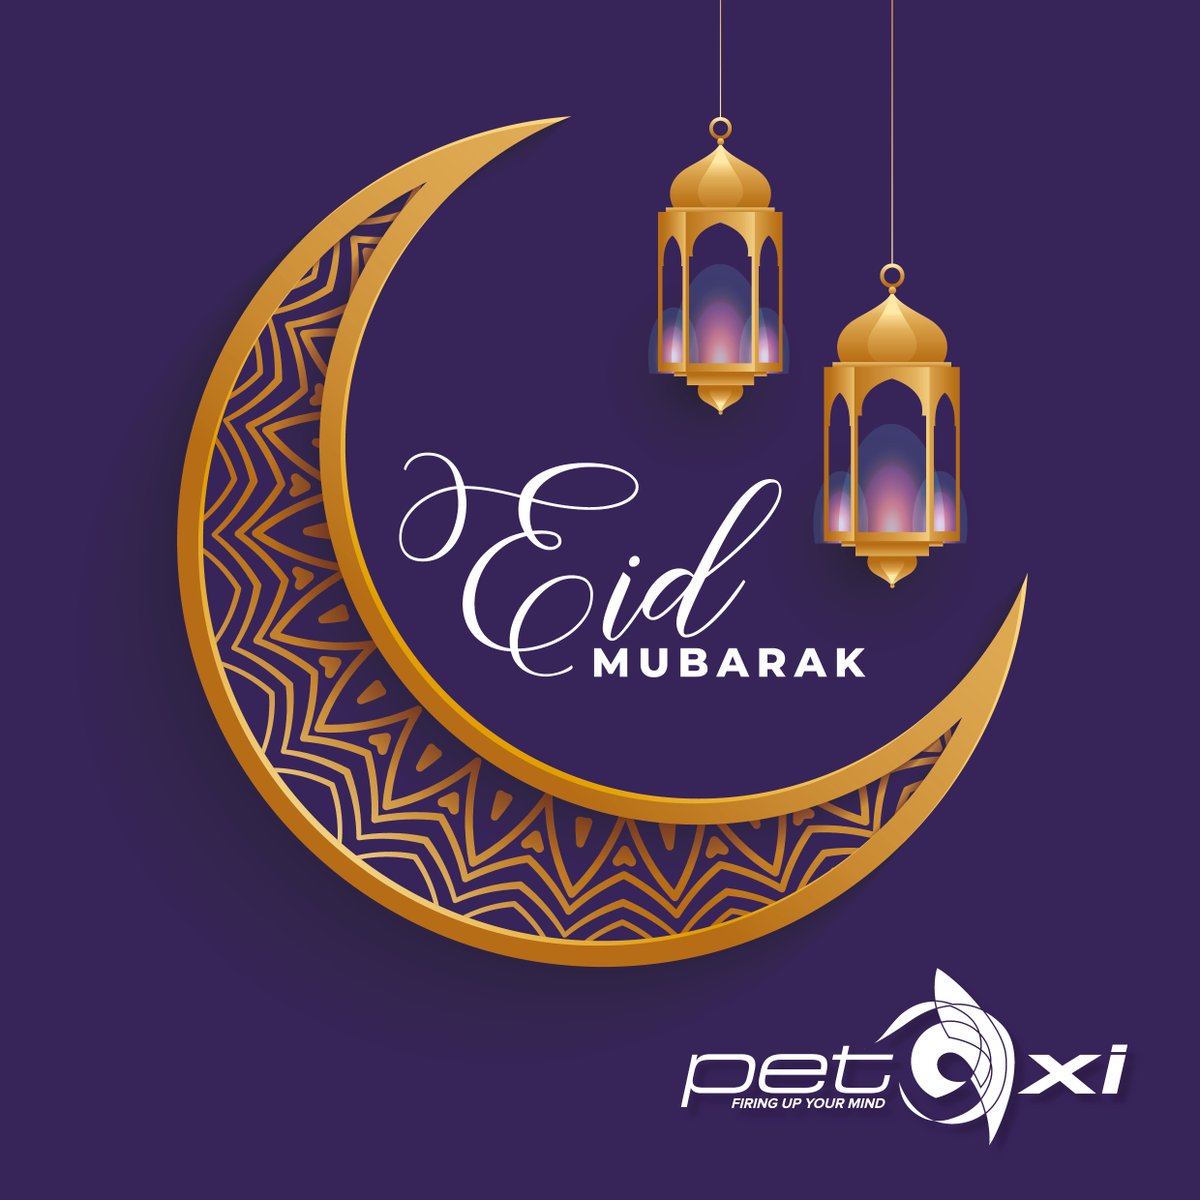 As Ramadan ends, we send warm wishes to all who are celebrating Eid al-Fitr and may your celebrations be filled with peace, blessings, and happiness. Eid Mubarak! #eidmubarak #EidAlFitr2024 #peace #blessings #happiness #joy #islam #religion #religiouscelebration